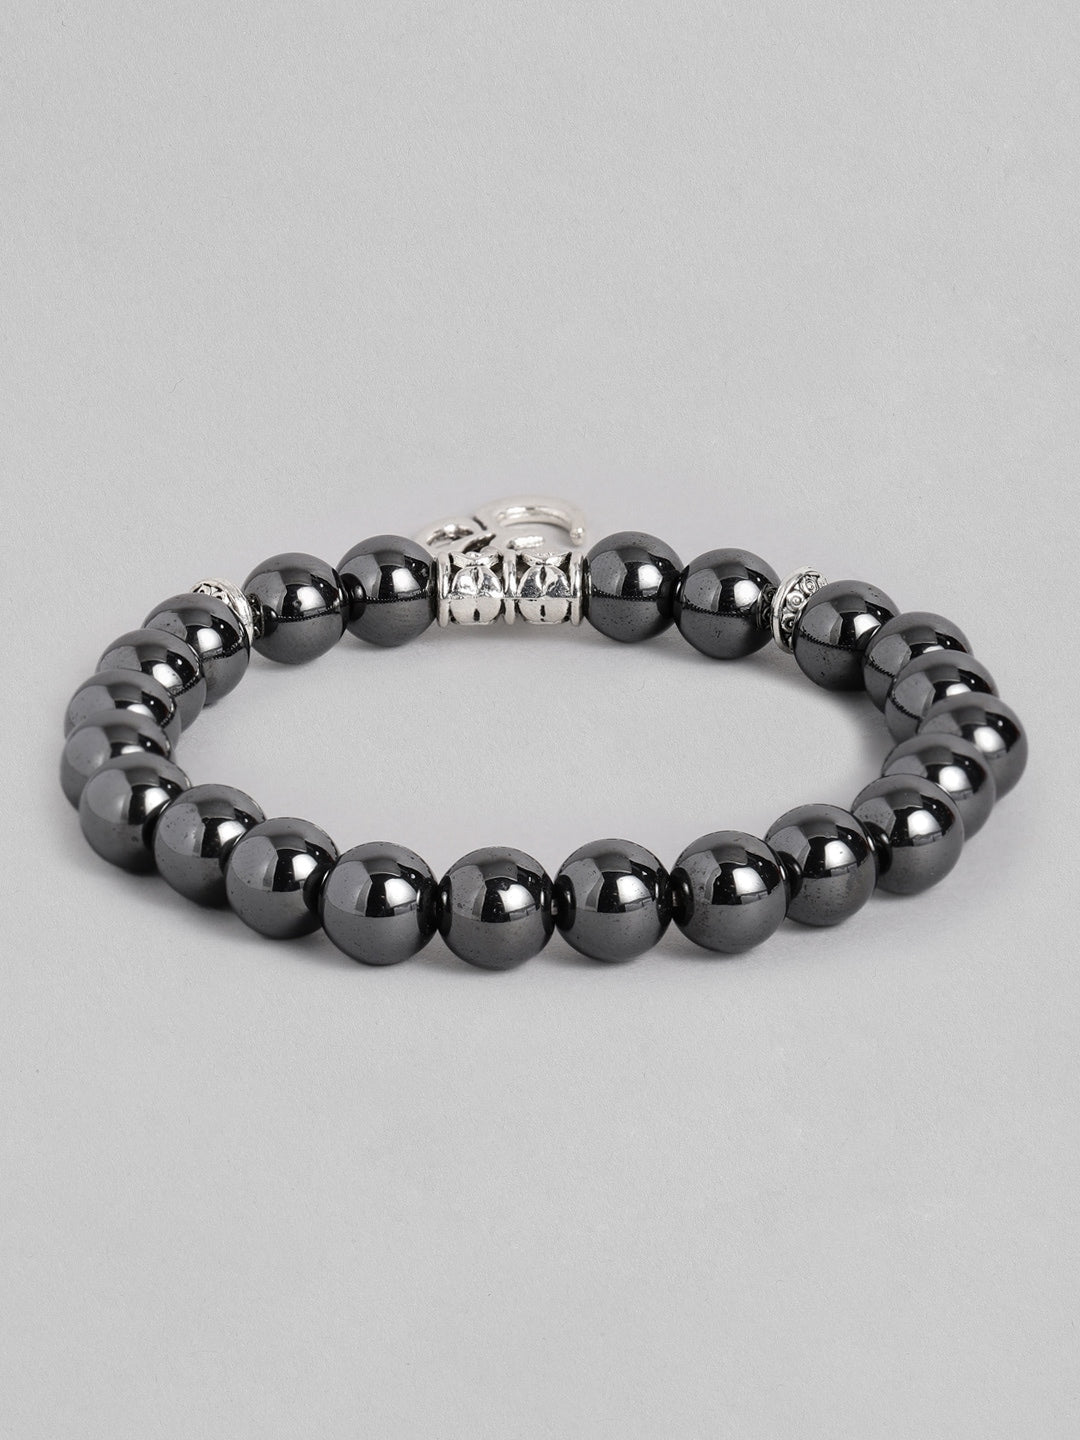 EL REGALO Men Charcoal Grey & Silver-Toned Handcrafted Om Elasticated Charm Bracelet - for Men
Style ID: 16186566